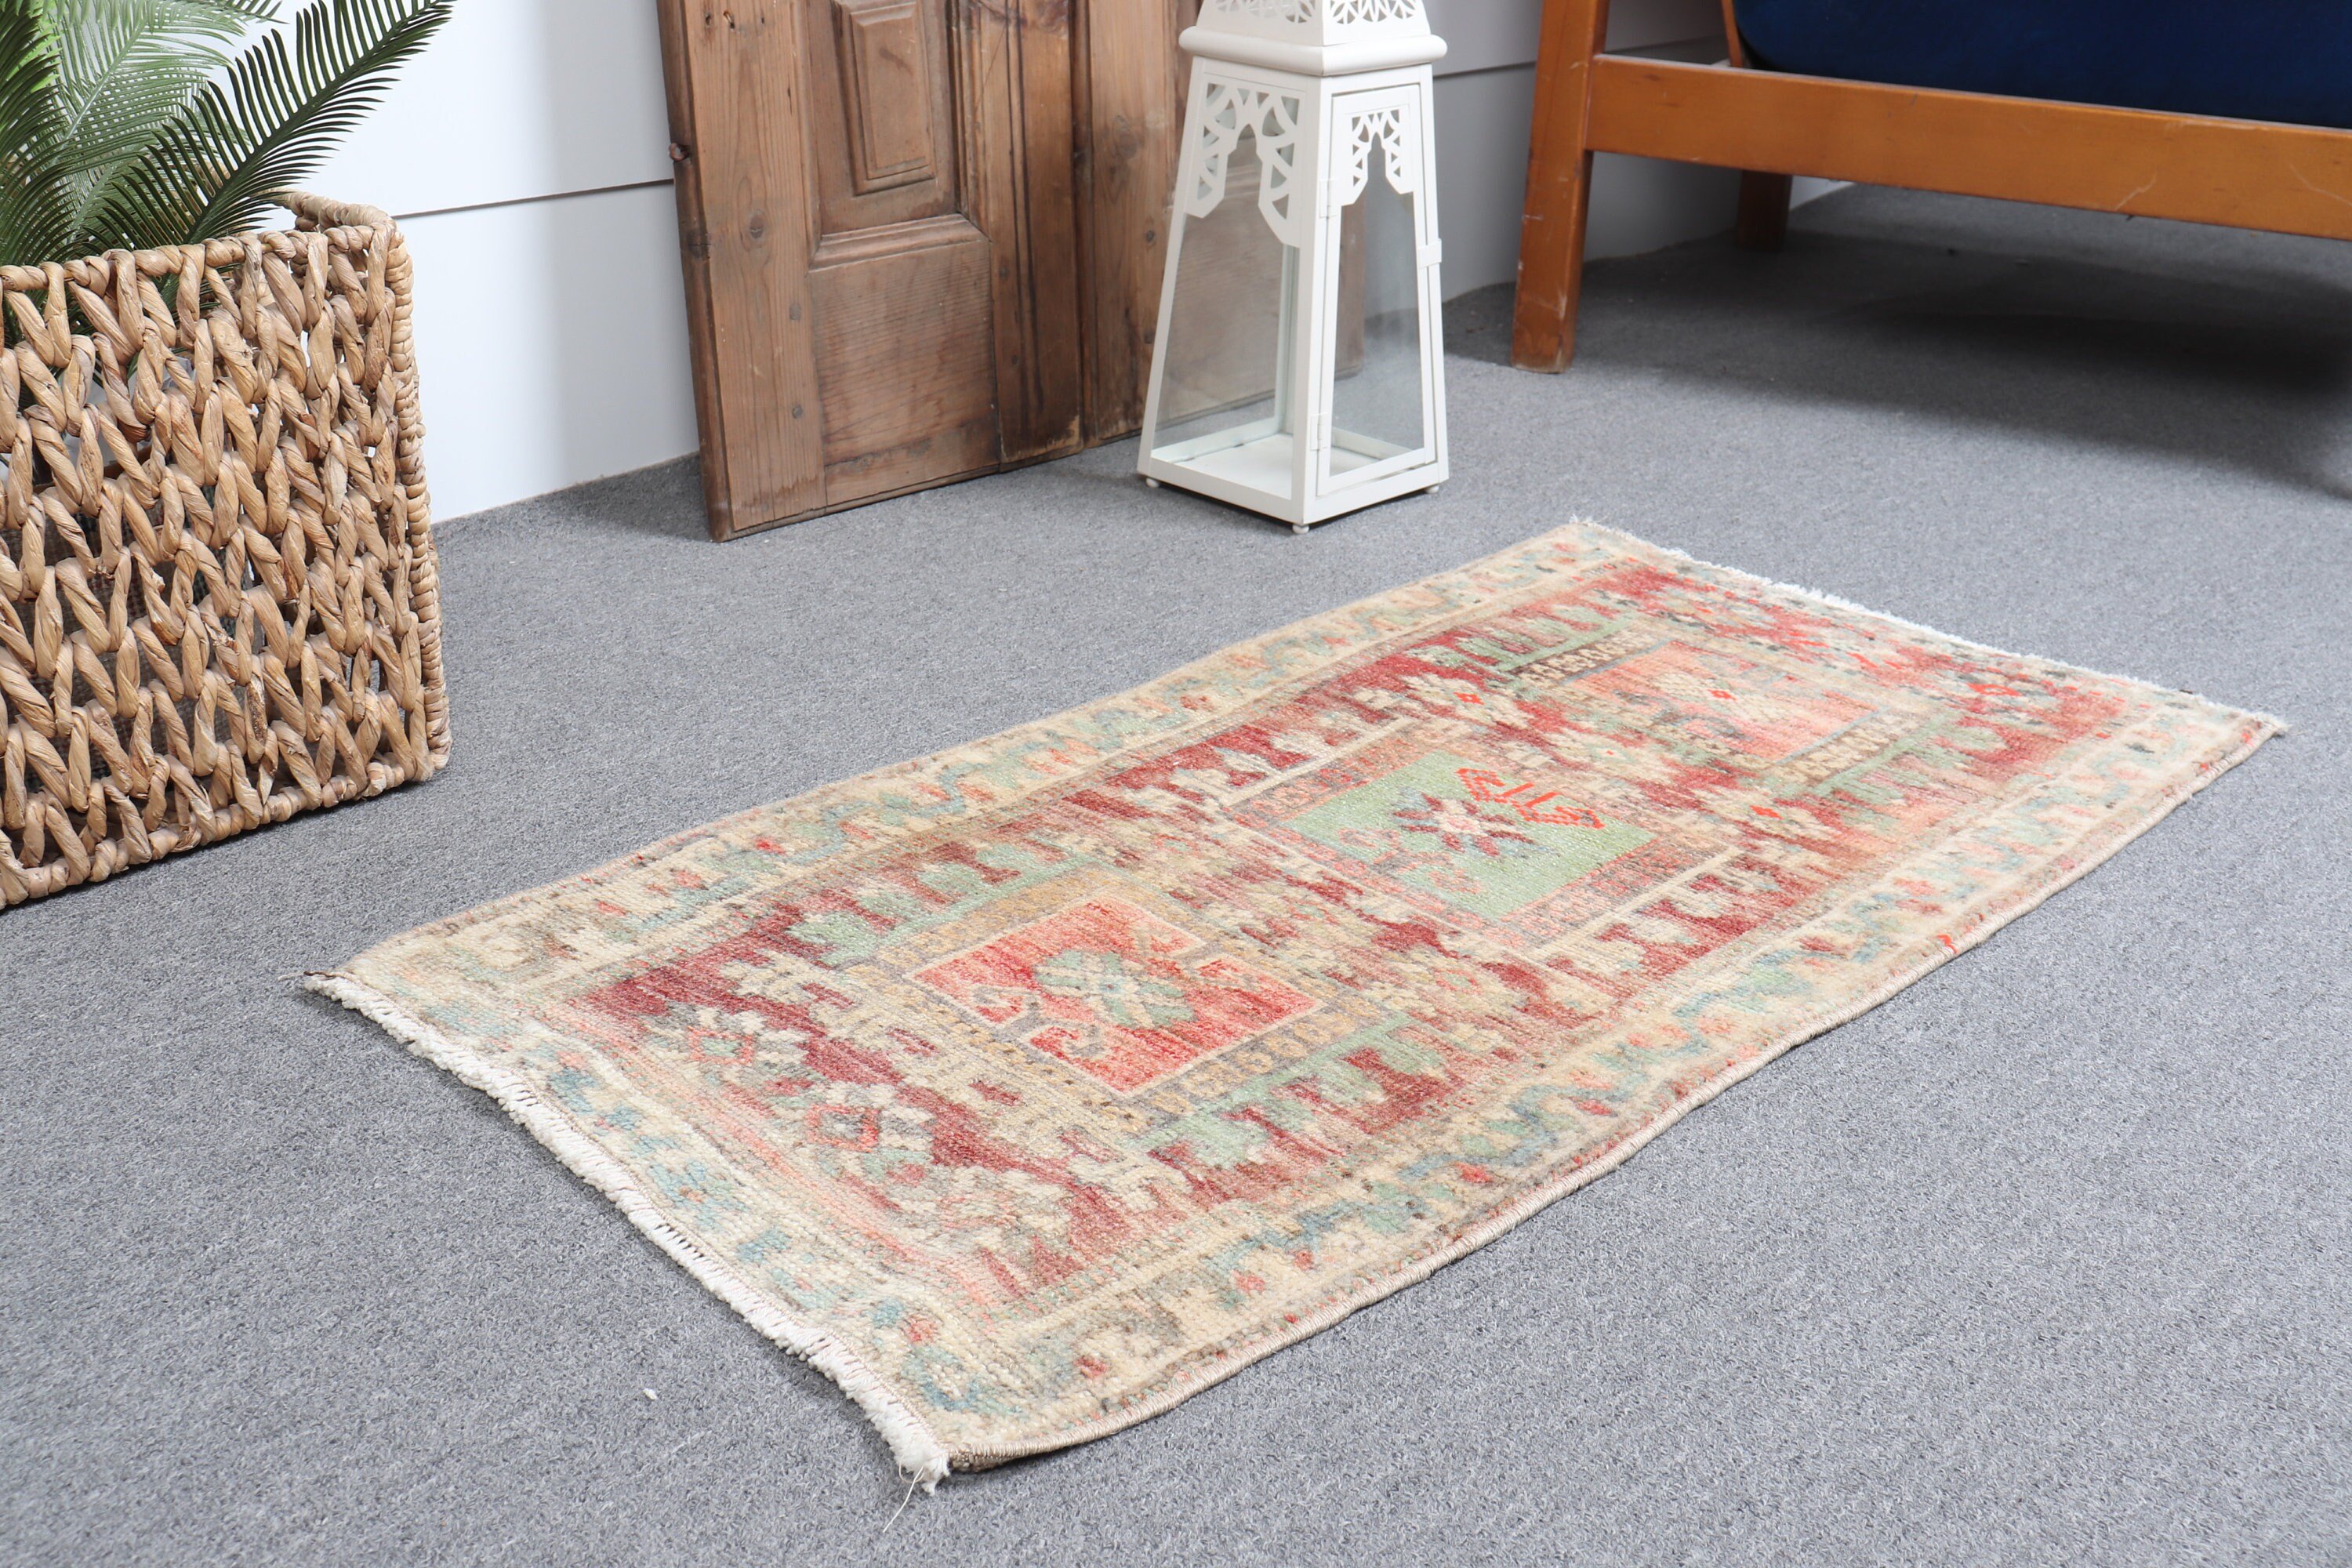 Rugs for Bath, Red Home Decor Rugs, 1.7x3 ft Small Rug, Antique Rug, Nursery Rugs, Bedroom Rug, Turkish Rugs, Entry Rug, Vintage Rug